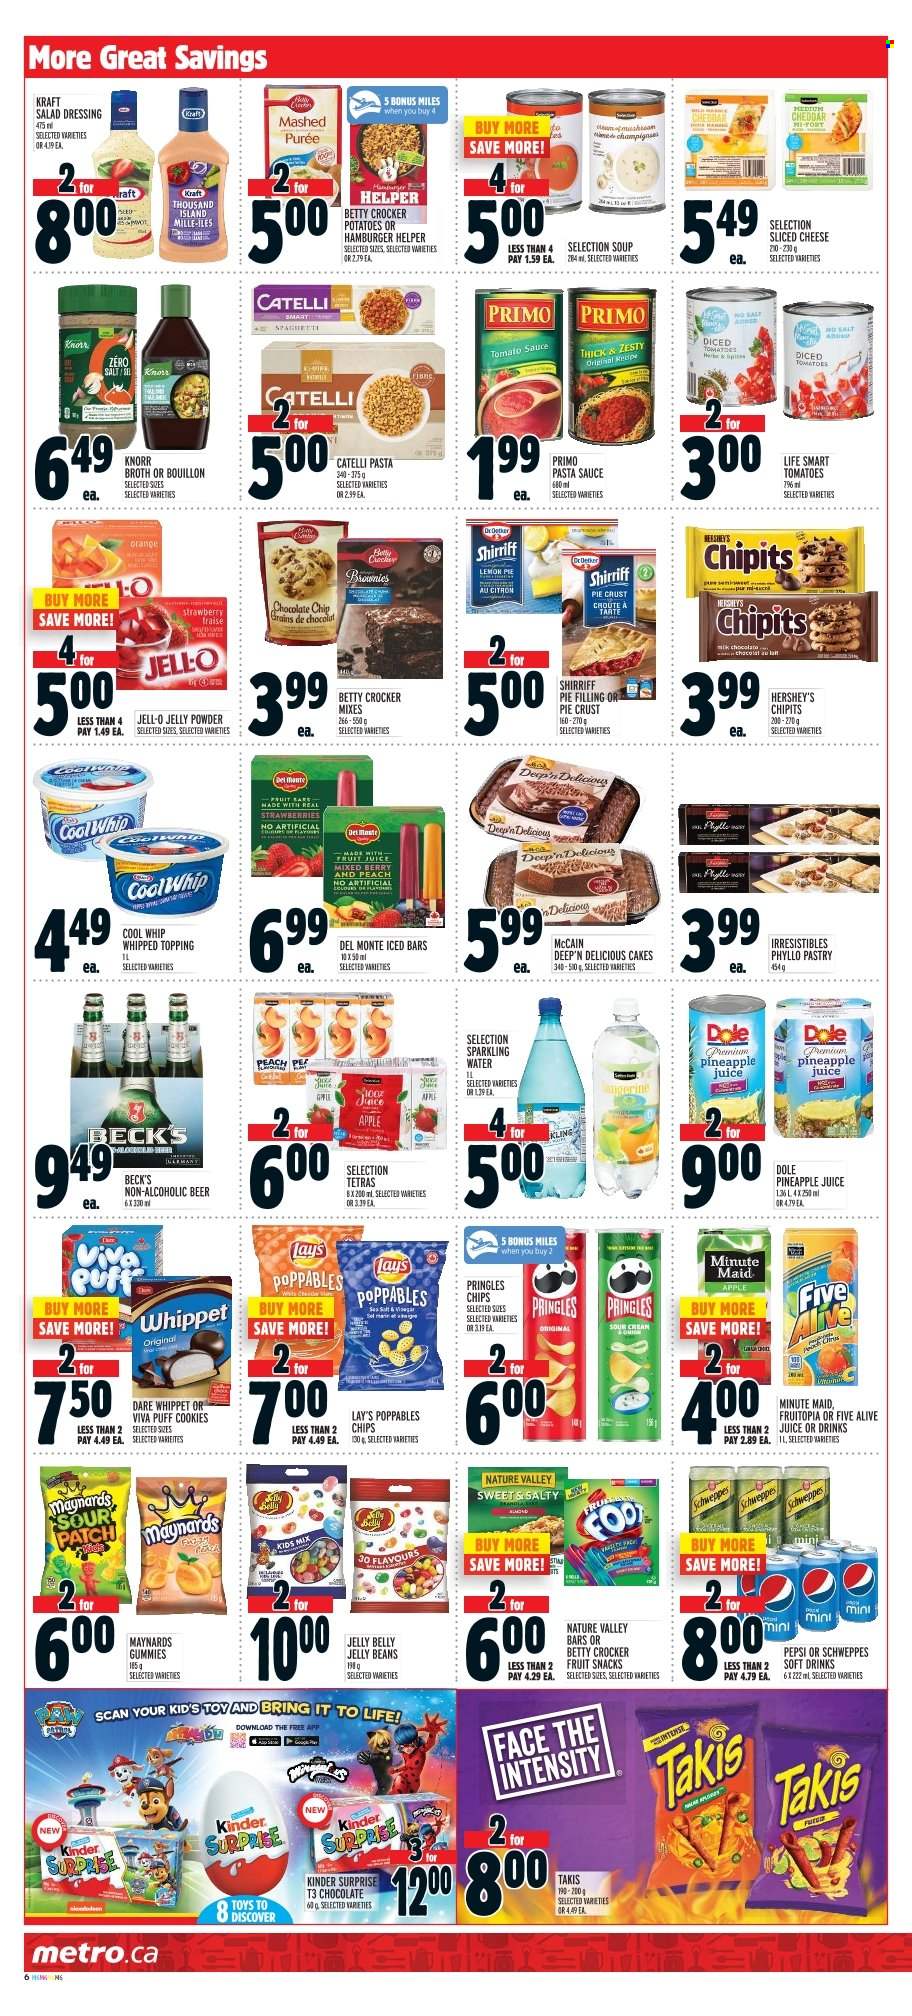 thumbnail - Circulaire Metro - 23 Mars 2023 - 29 Mars 2023 - Produits soldés - Knorr, McCain, cookies, chips, Pringles, Lay’s, bouillon, Pepsi, Schweppes, Kinder. Page 12.